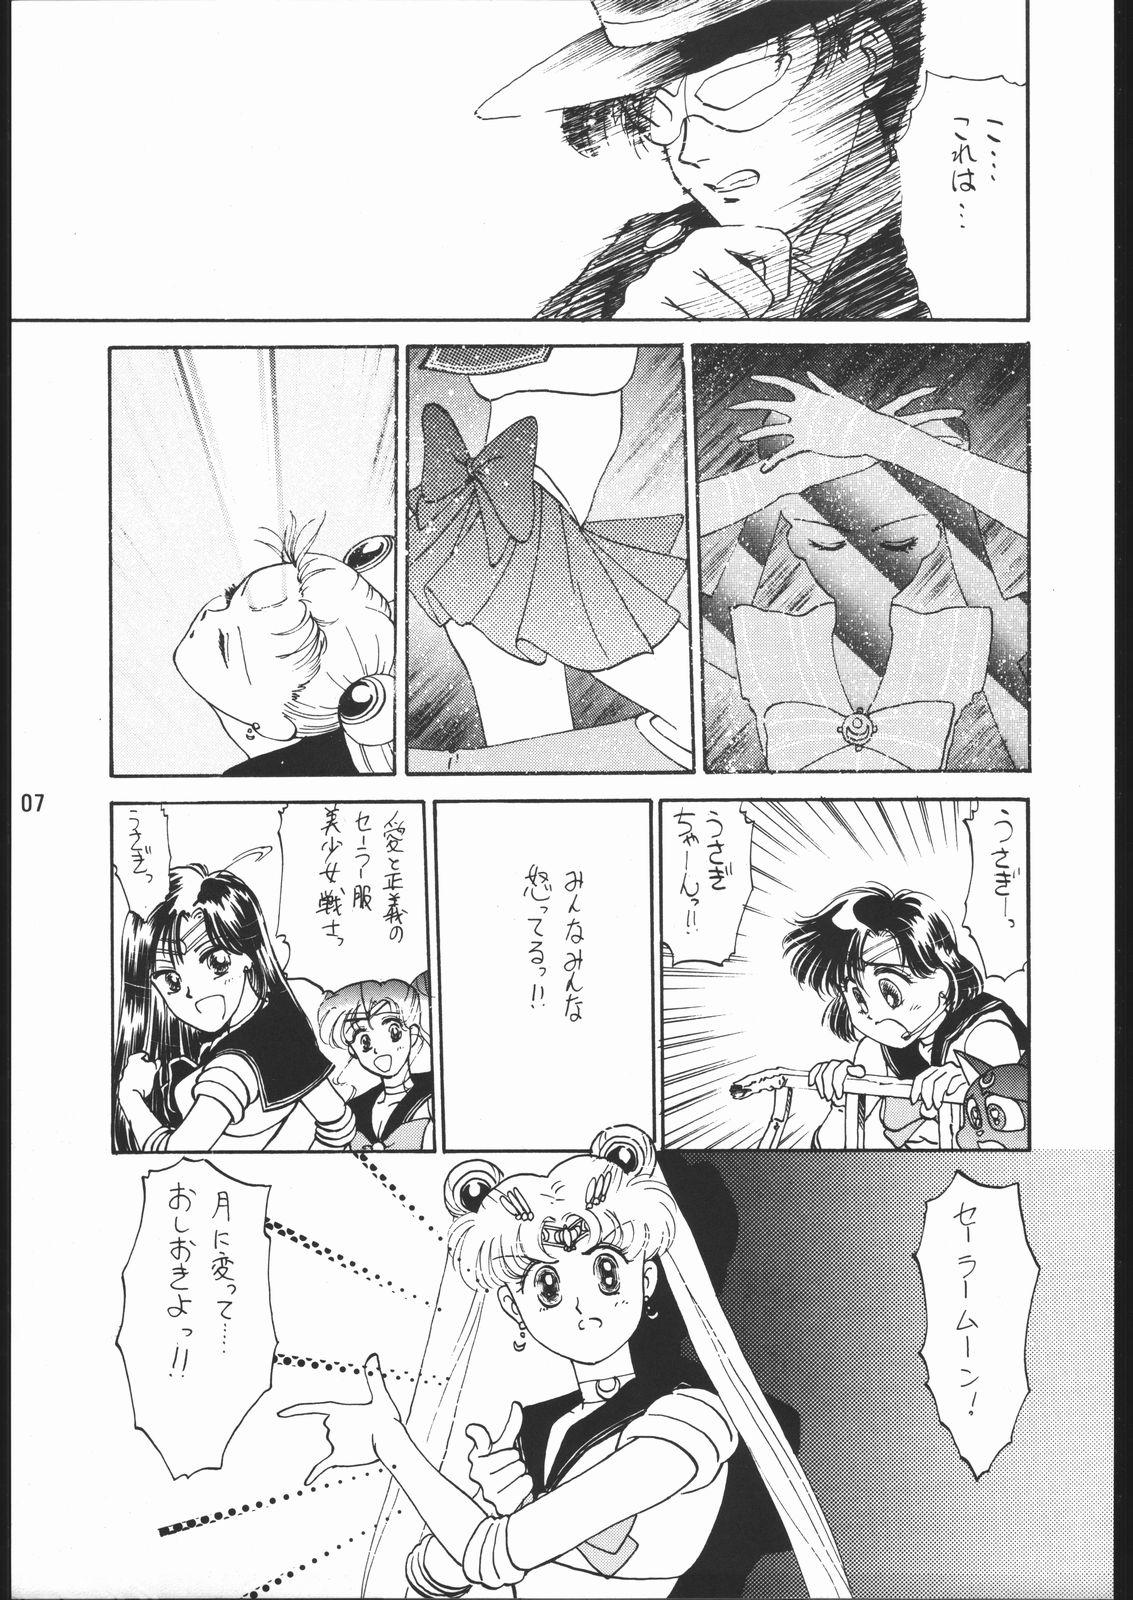 Thuylinh うさぎがピョン!! - Sailor moon Eating Pussy - Page 6